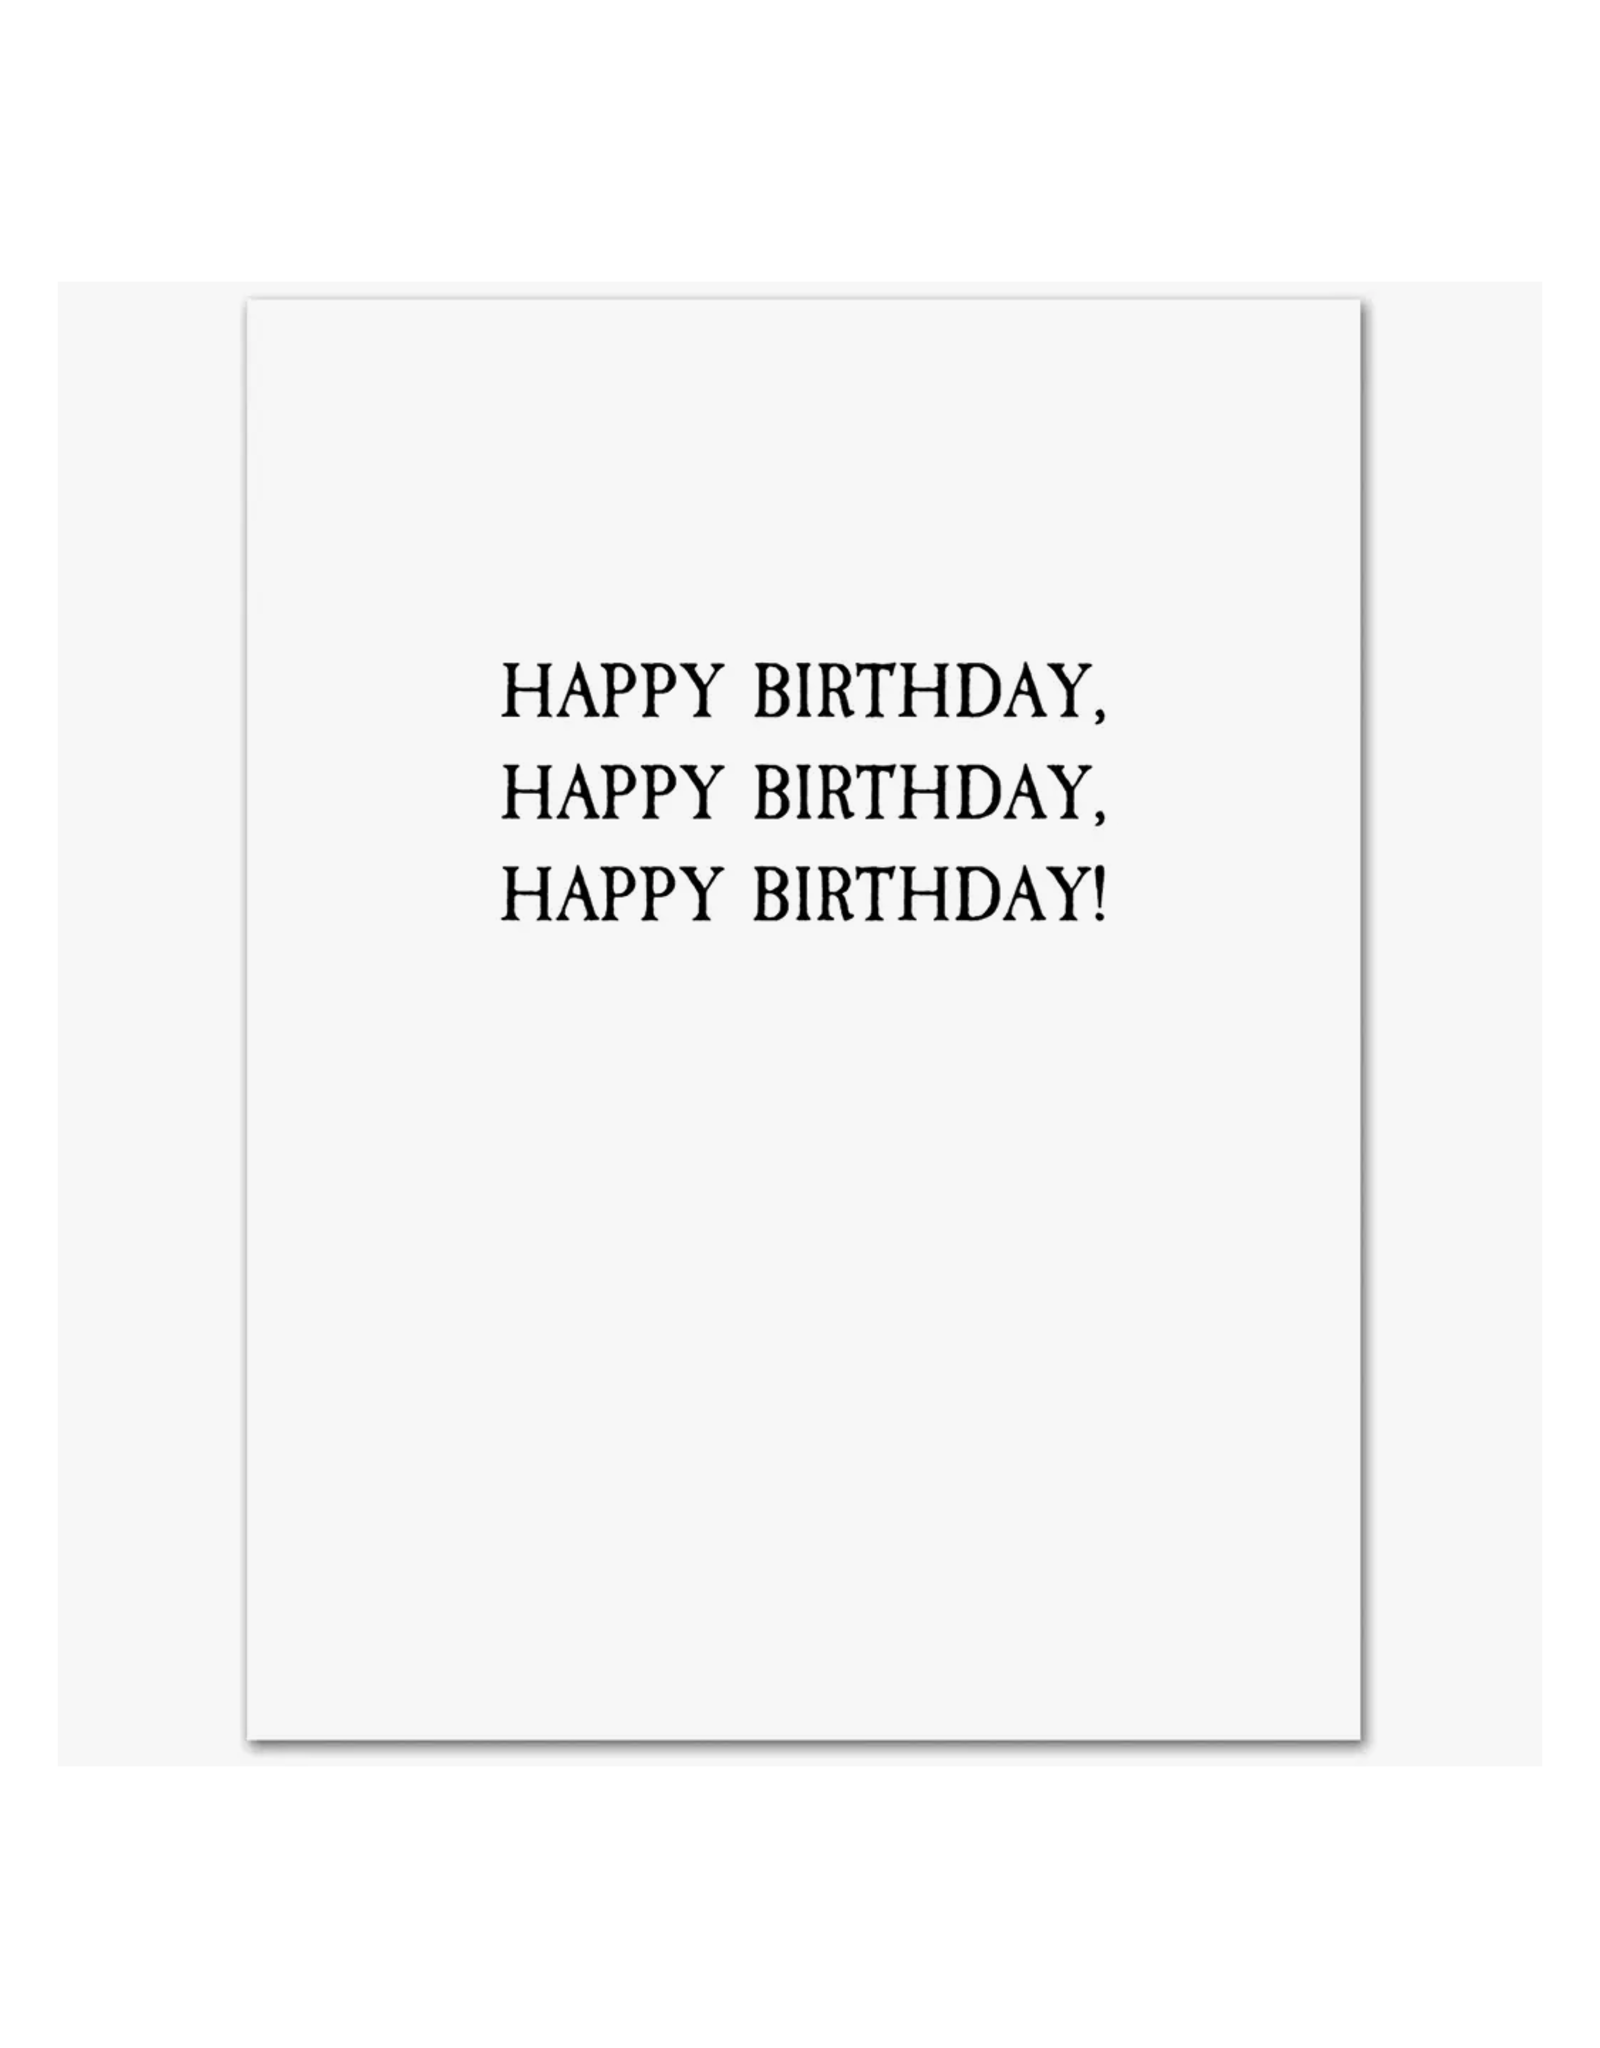 It's Showtime Beetlejuice Birthday Greeting Card